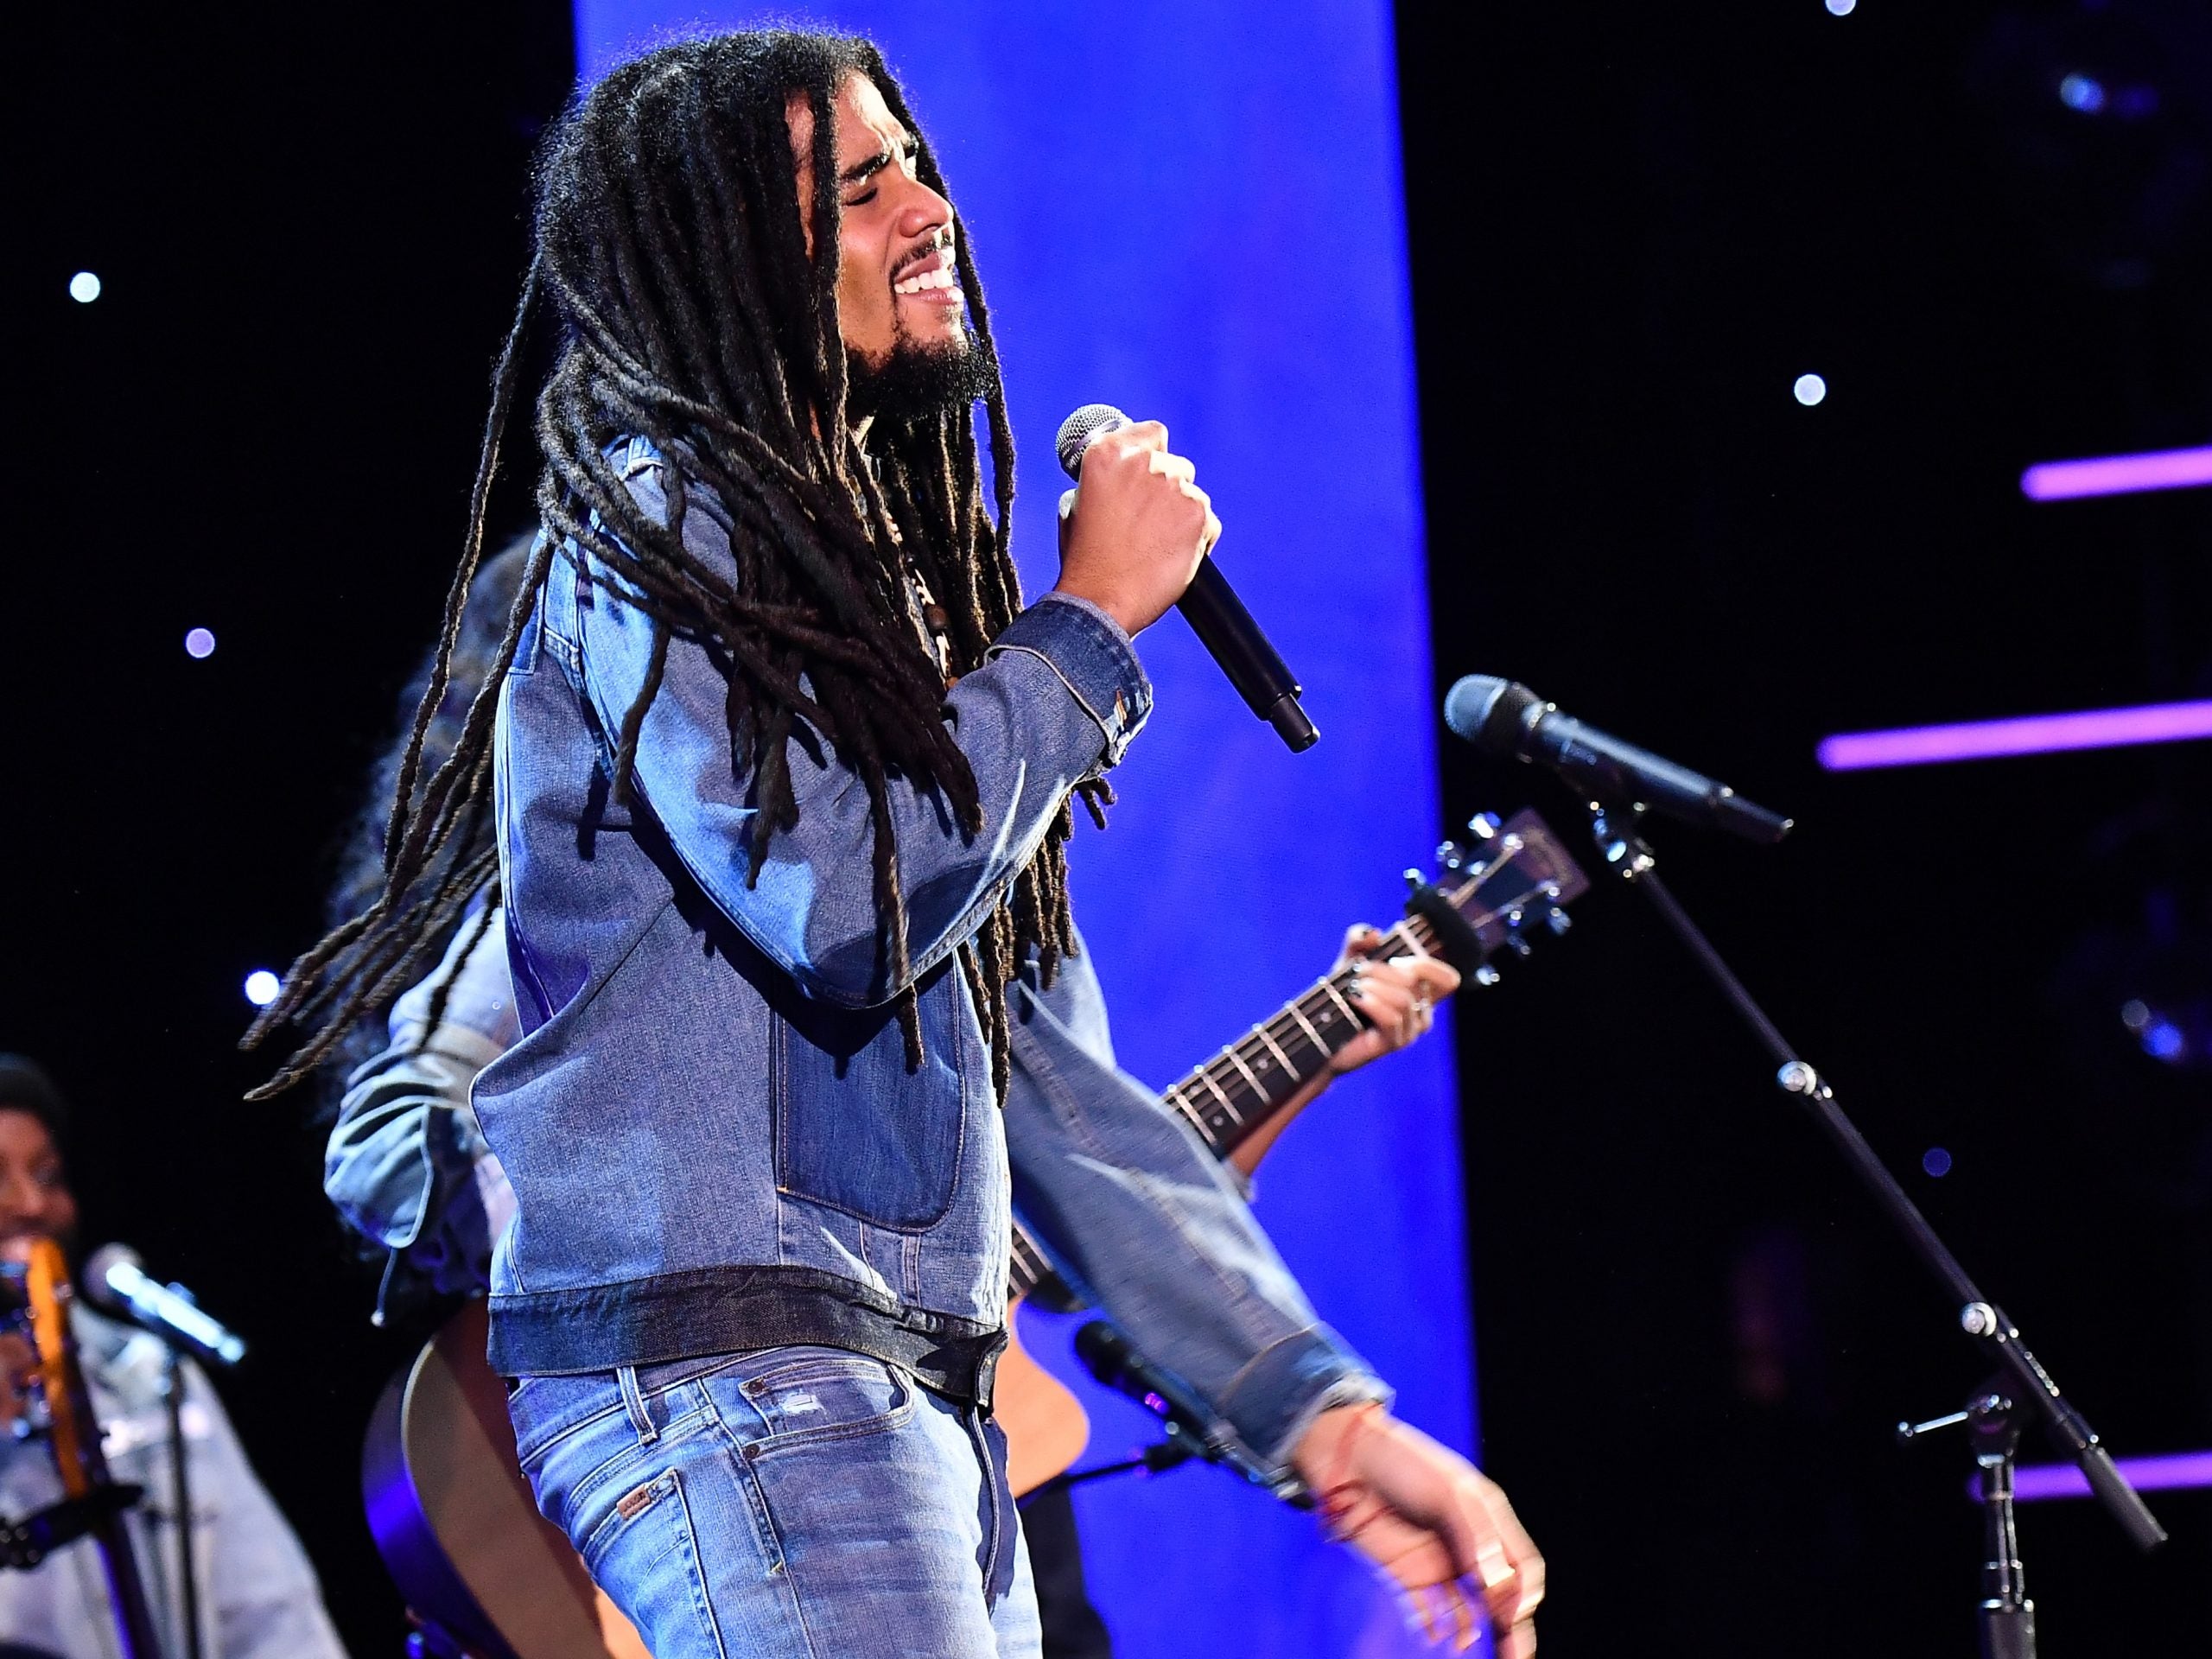 Skip Marley Adds Wale for “Slow Down” Remix with H.E.R.